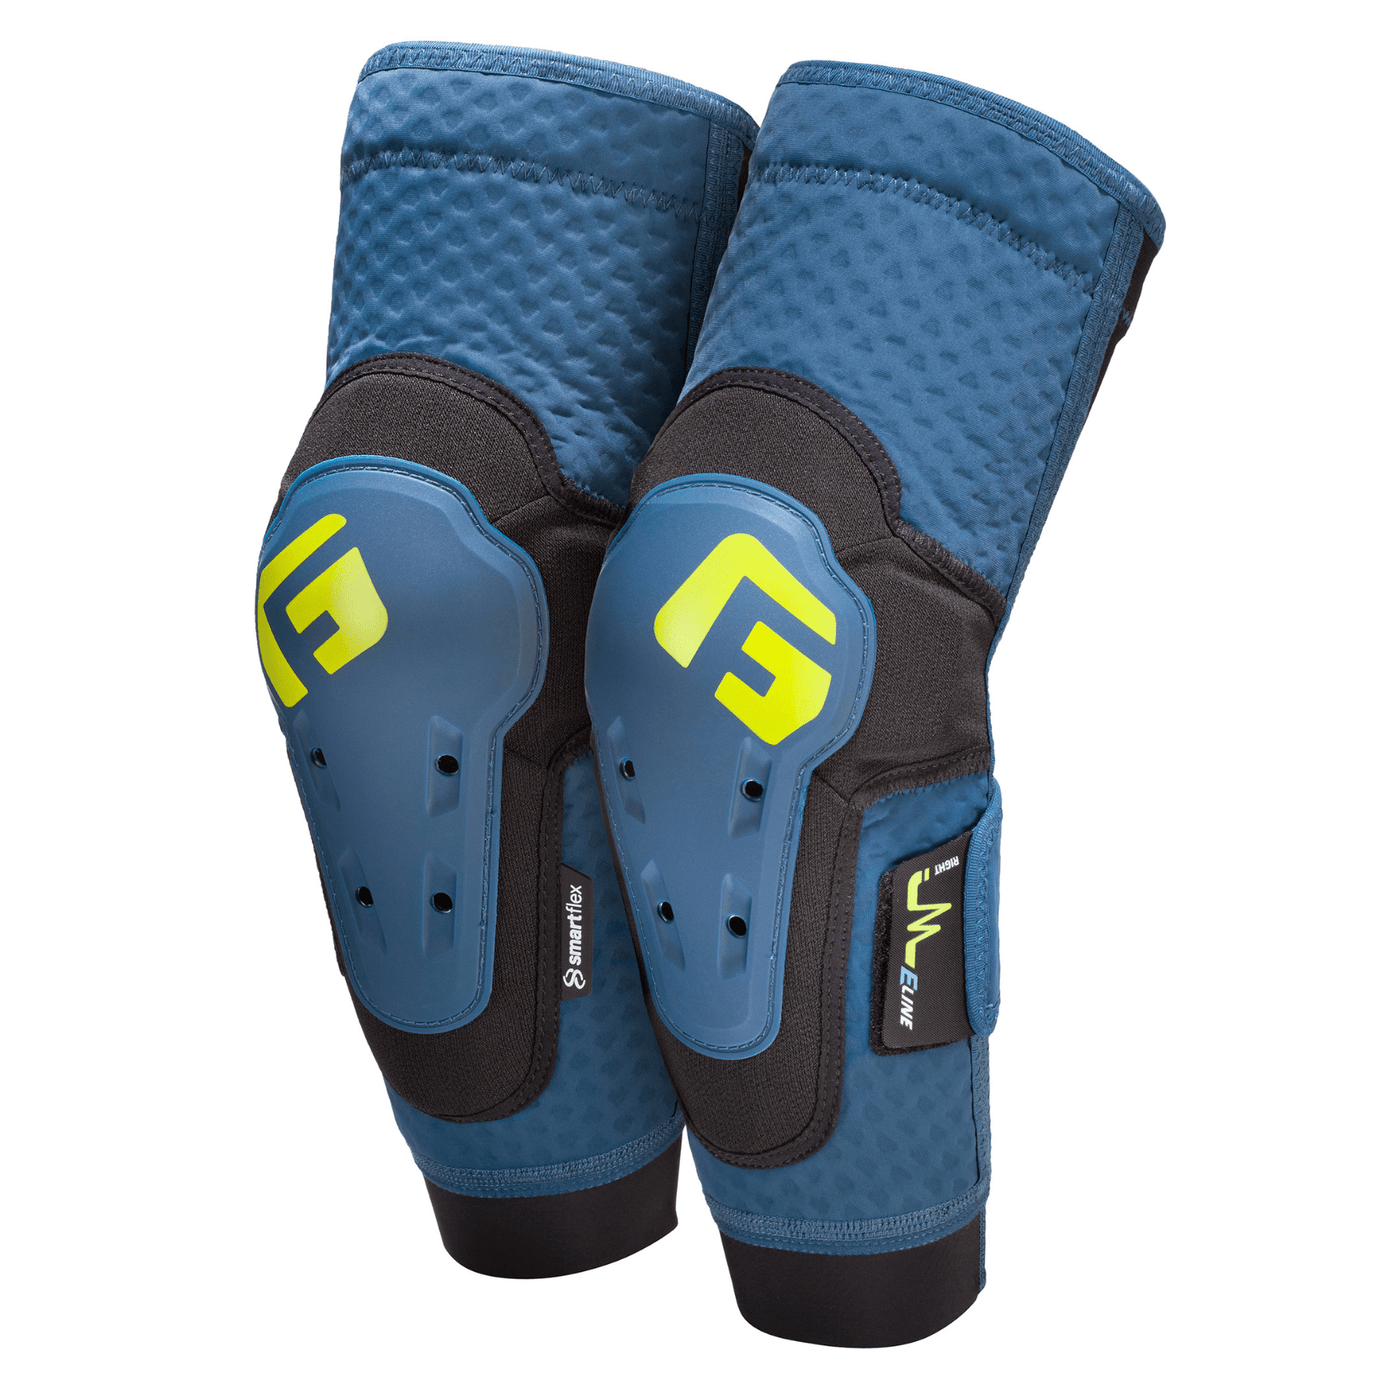 G-Form Elbow Guards E-Line - Storm Blue 8Lines Shop - Fast Shipping